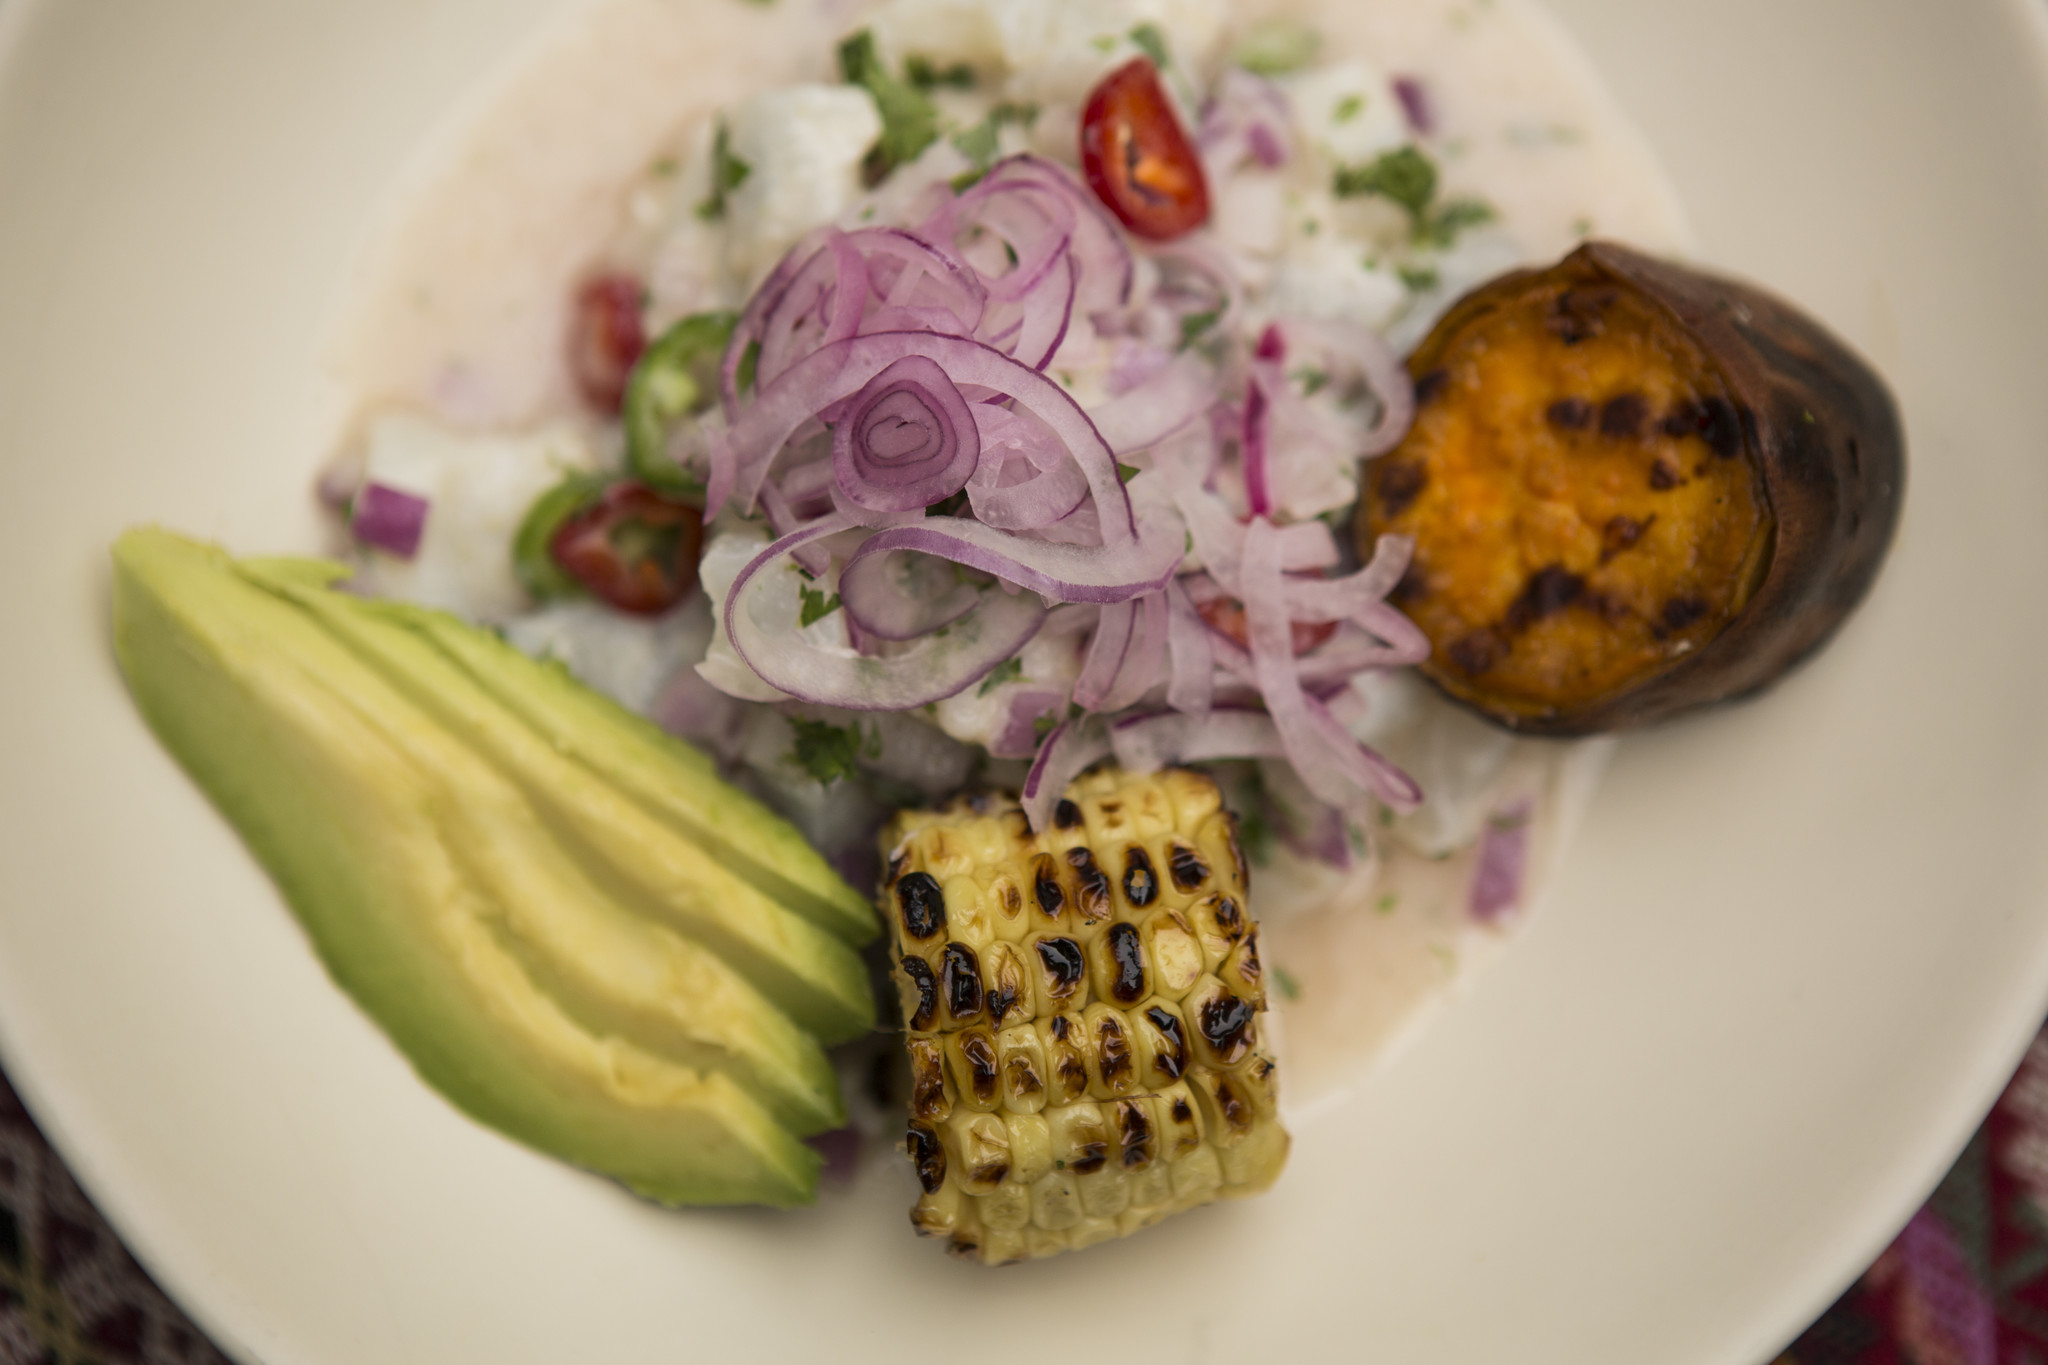 Land and sea ceviches from Peru and Ecuador - Sun Sentinel